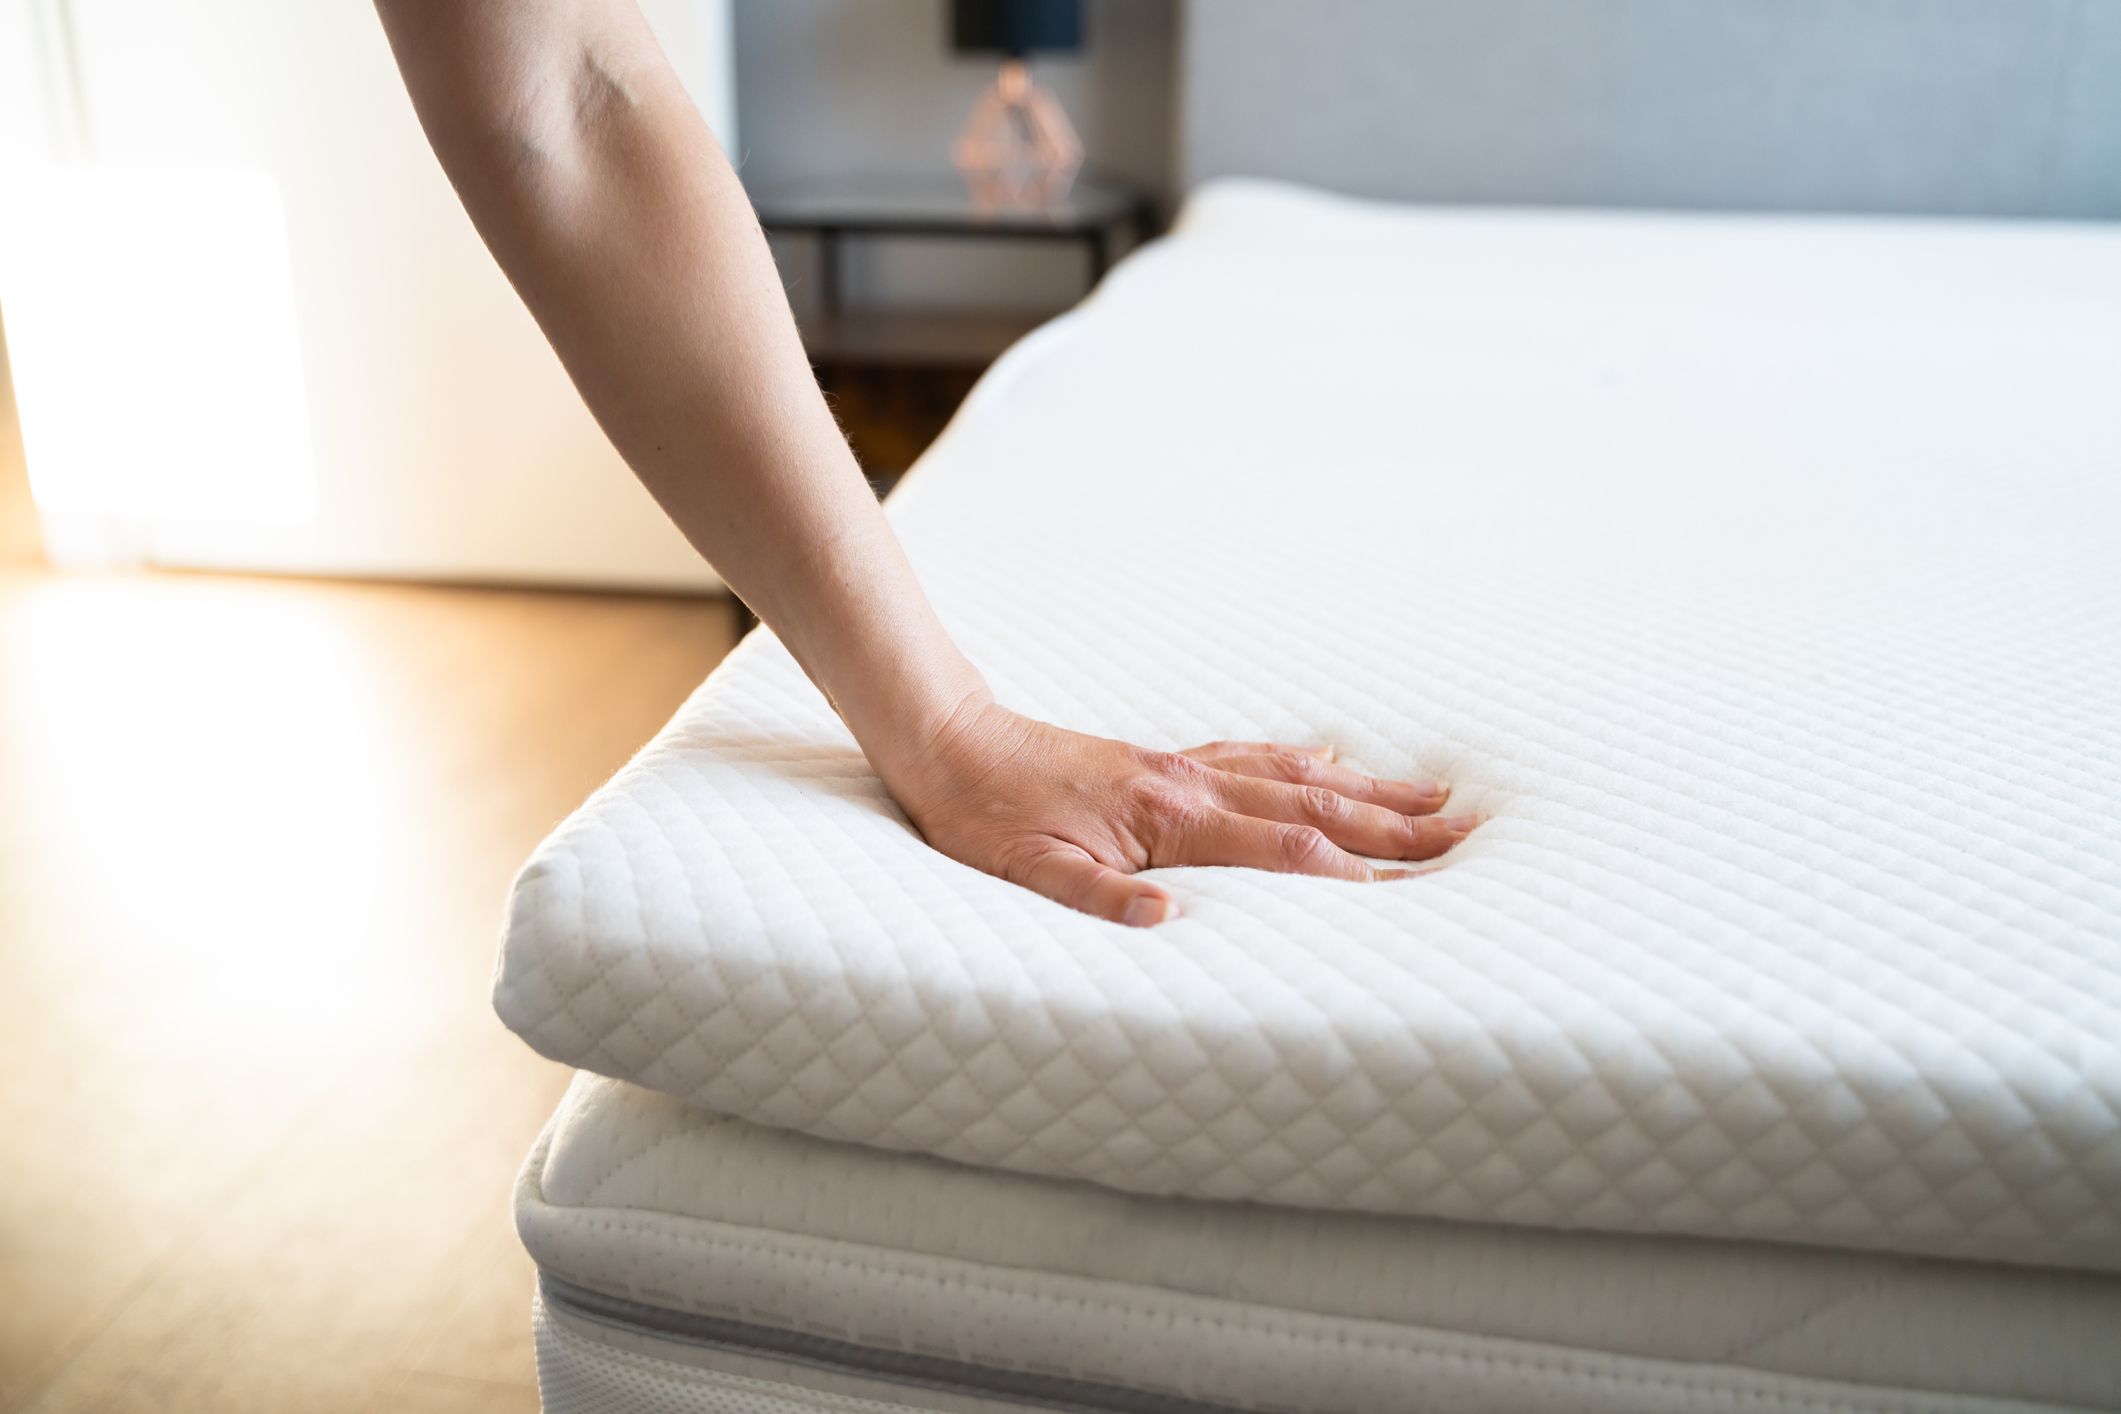 8 Best Memory Foam Mattress Toppers in 2023, According Experts